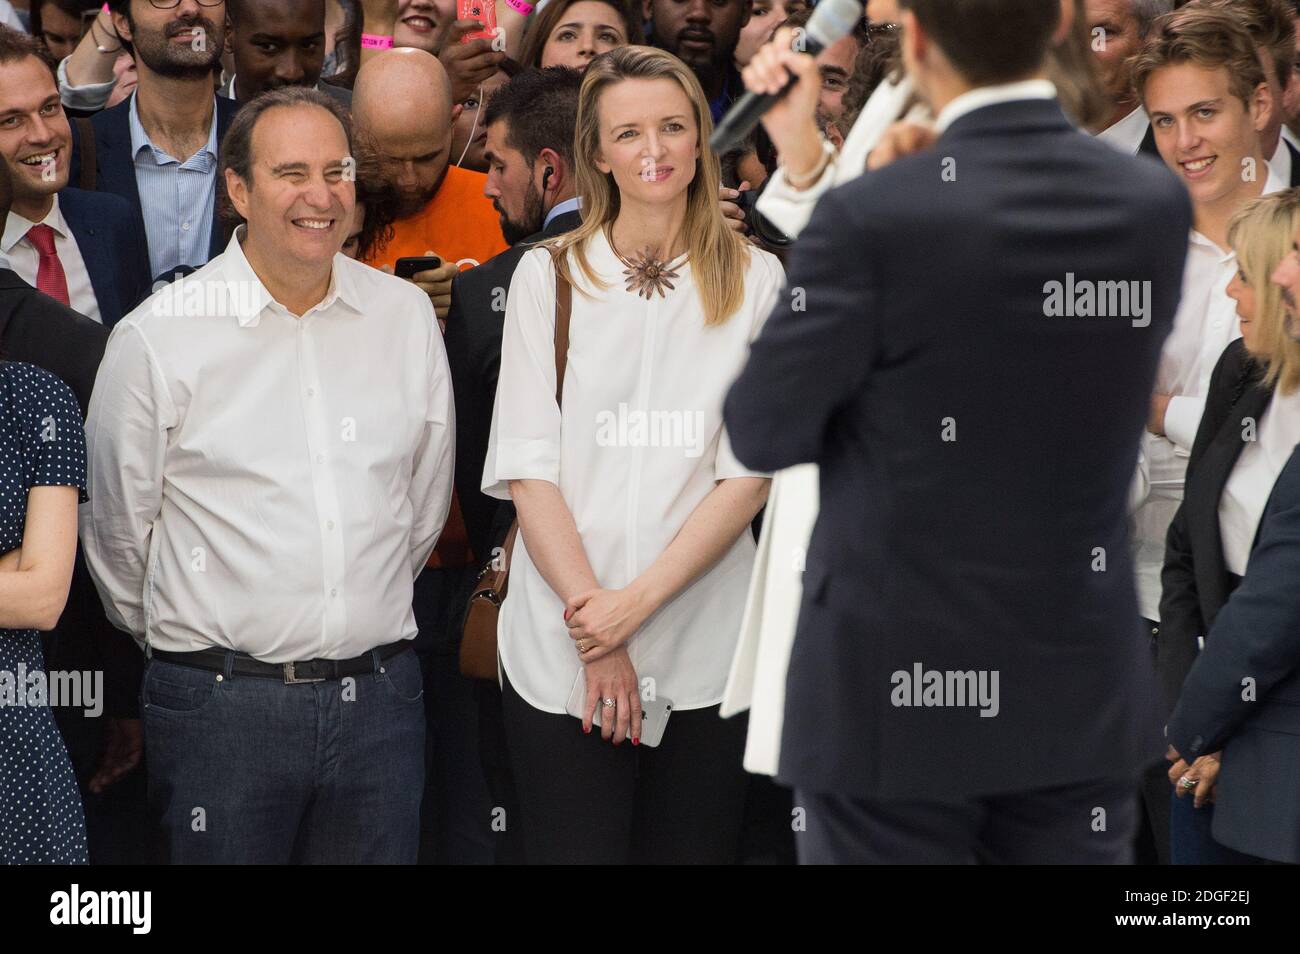 Xavier Niel and Delphine Arnault in stands during French Tennis